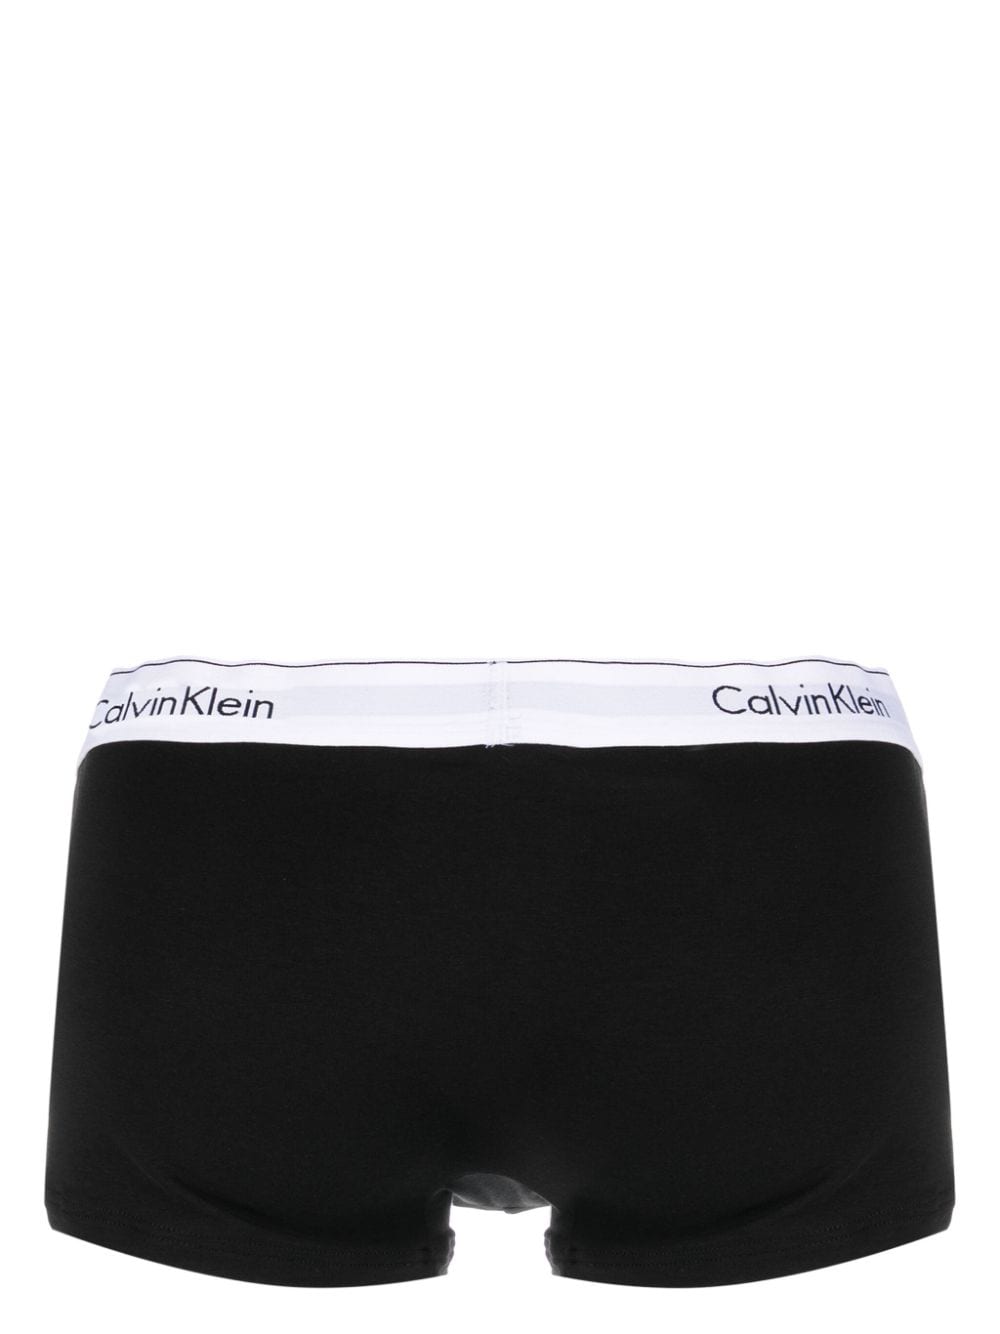 Image 2 of Calvin Klein logo-waistband boxer pack (pack of three)